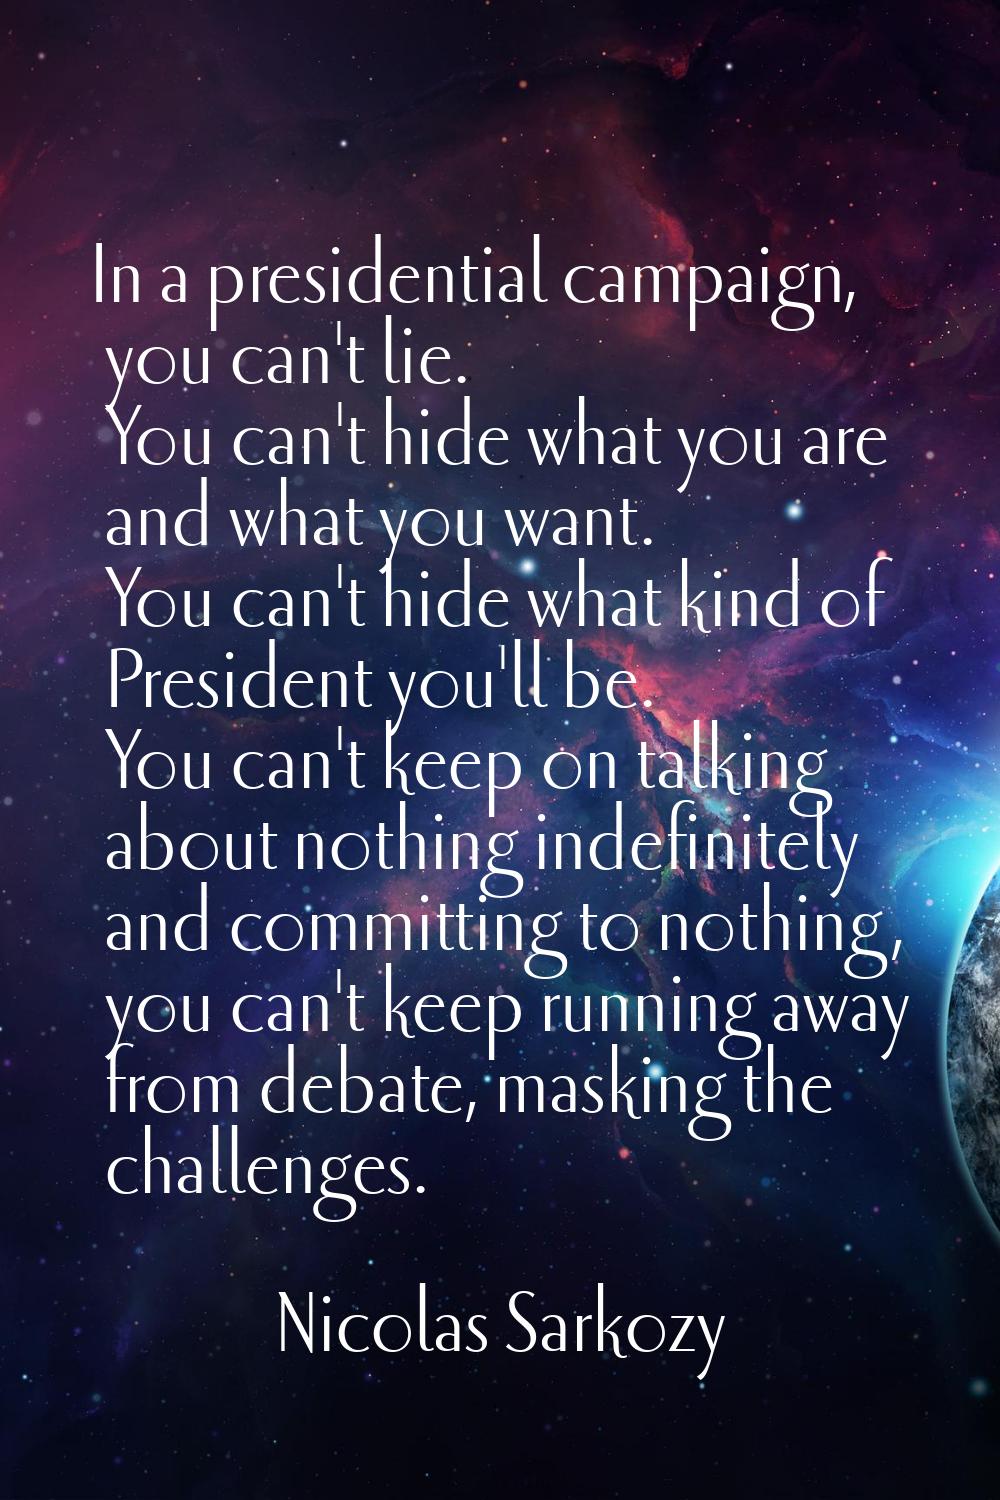 In a presidential campaign, you can't lie. You can't hide what you are and what you want. You can't